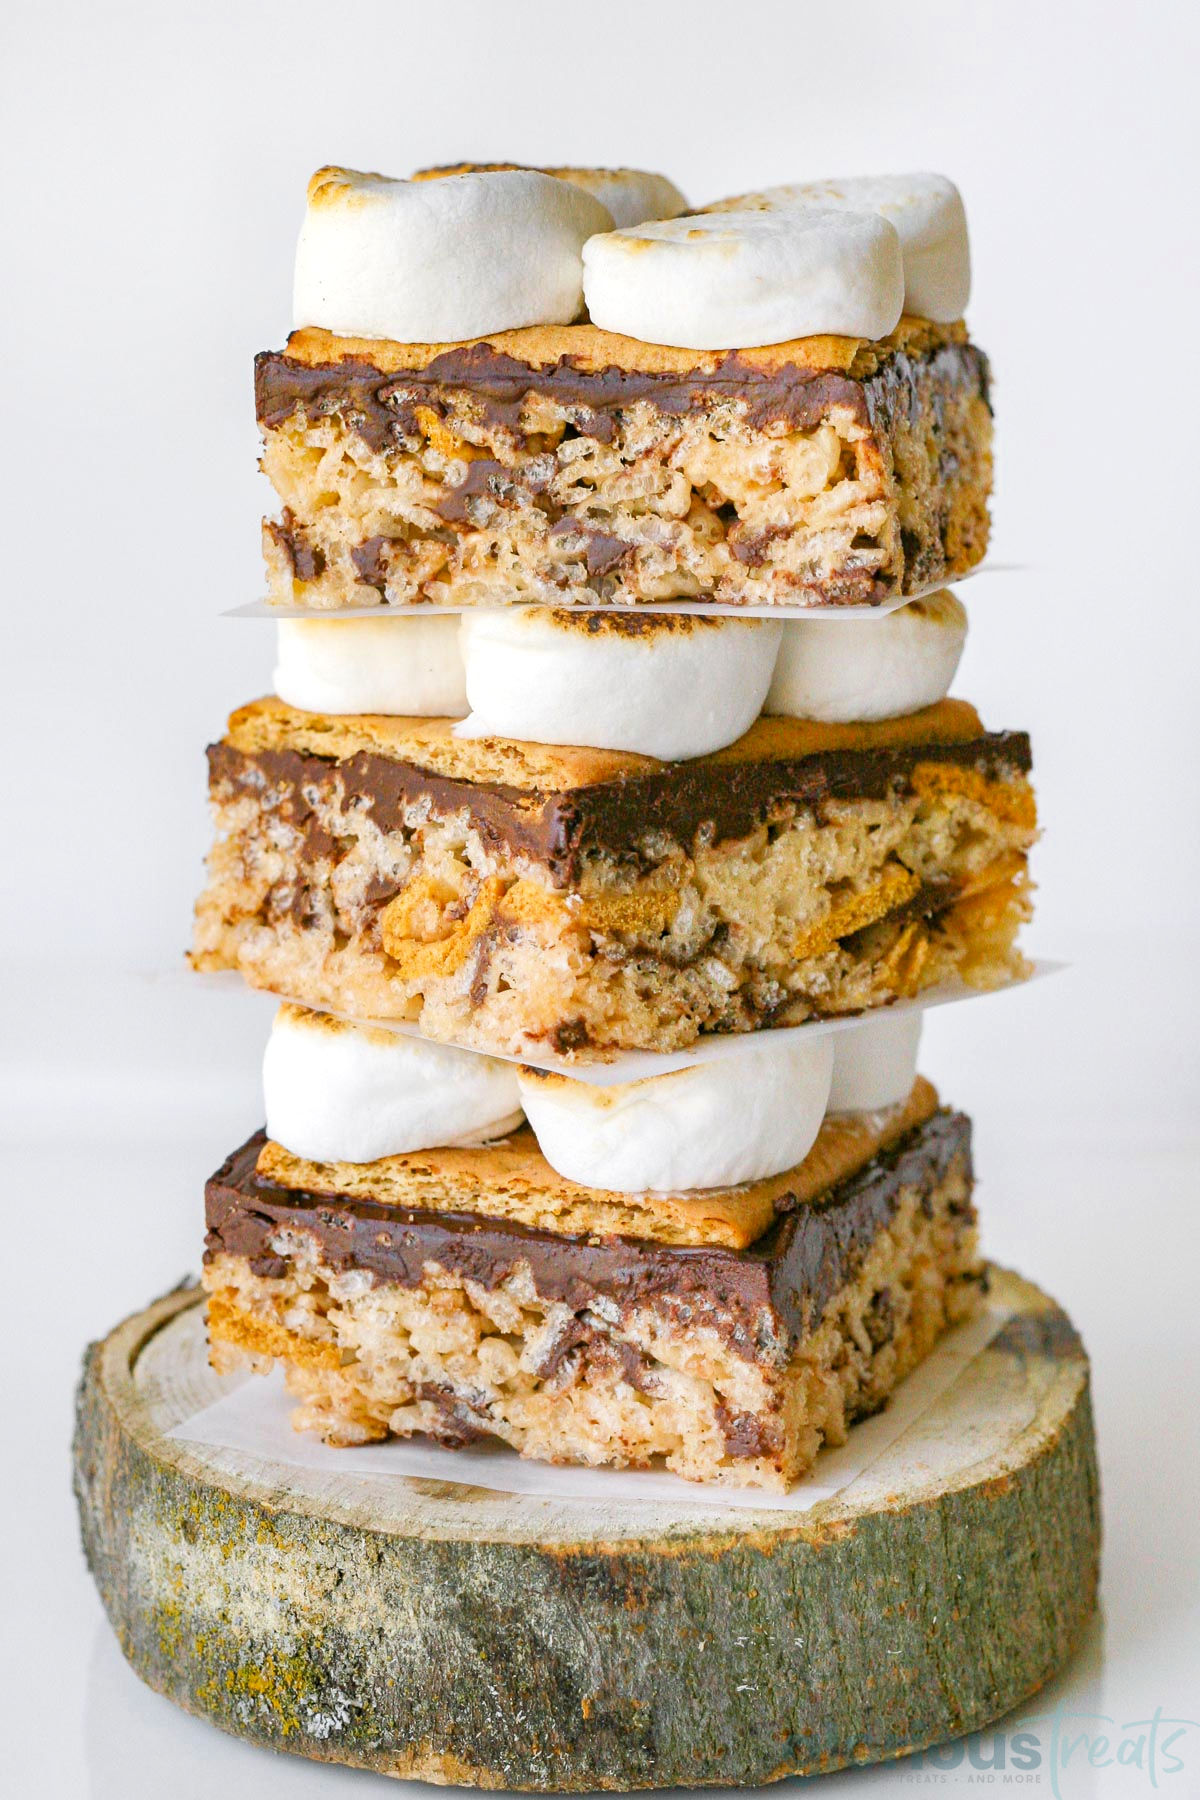 Three decadent smores rice krispie treats stacked on a log. Looking straight on so the layers of rice krispie treats, chocolate, graham crackers, and toasted marshmallows are visible.